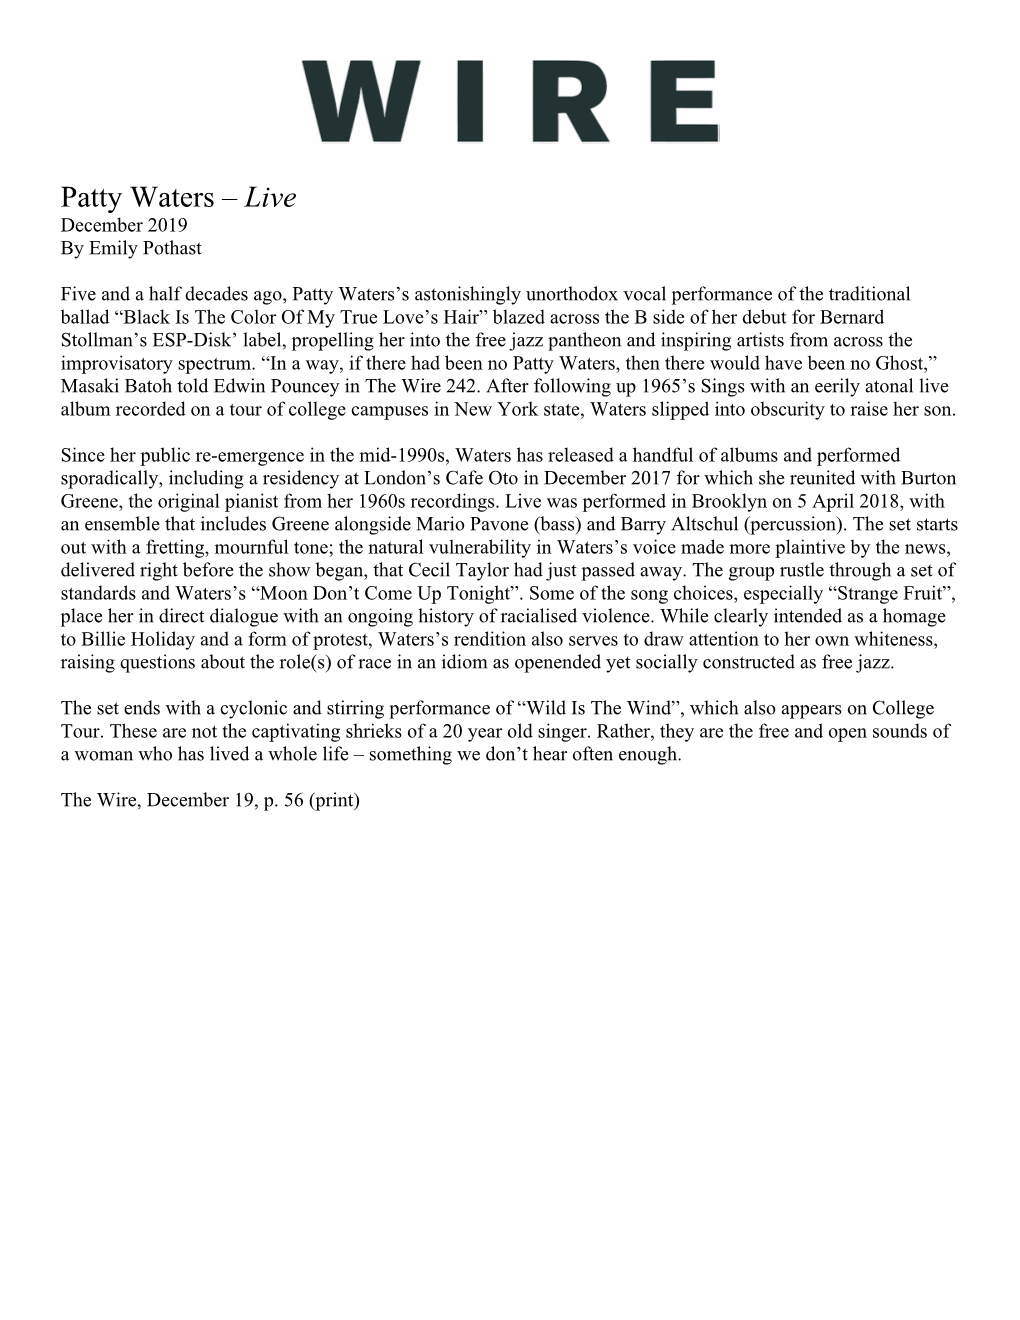 Patty Waters – Live December 2019 by Emily Pothast